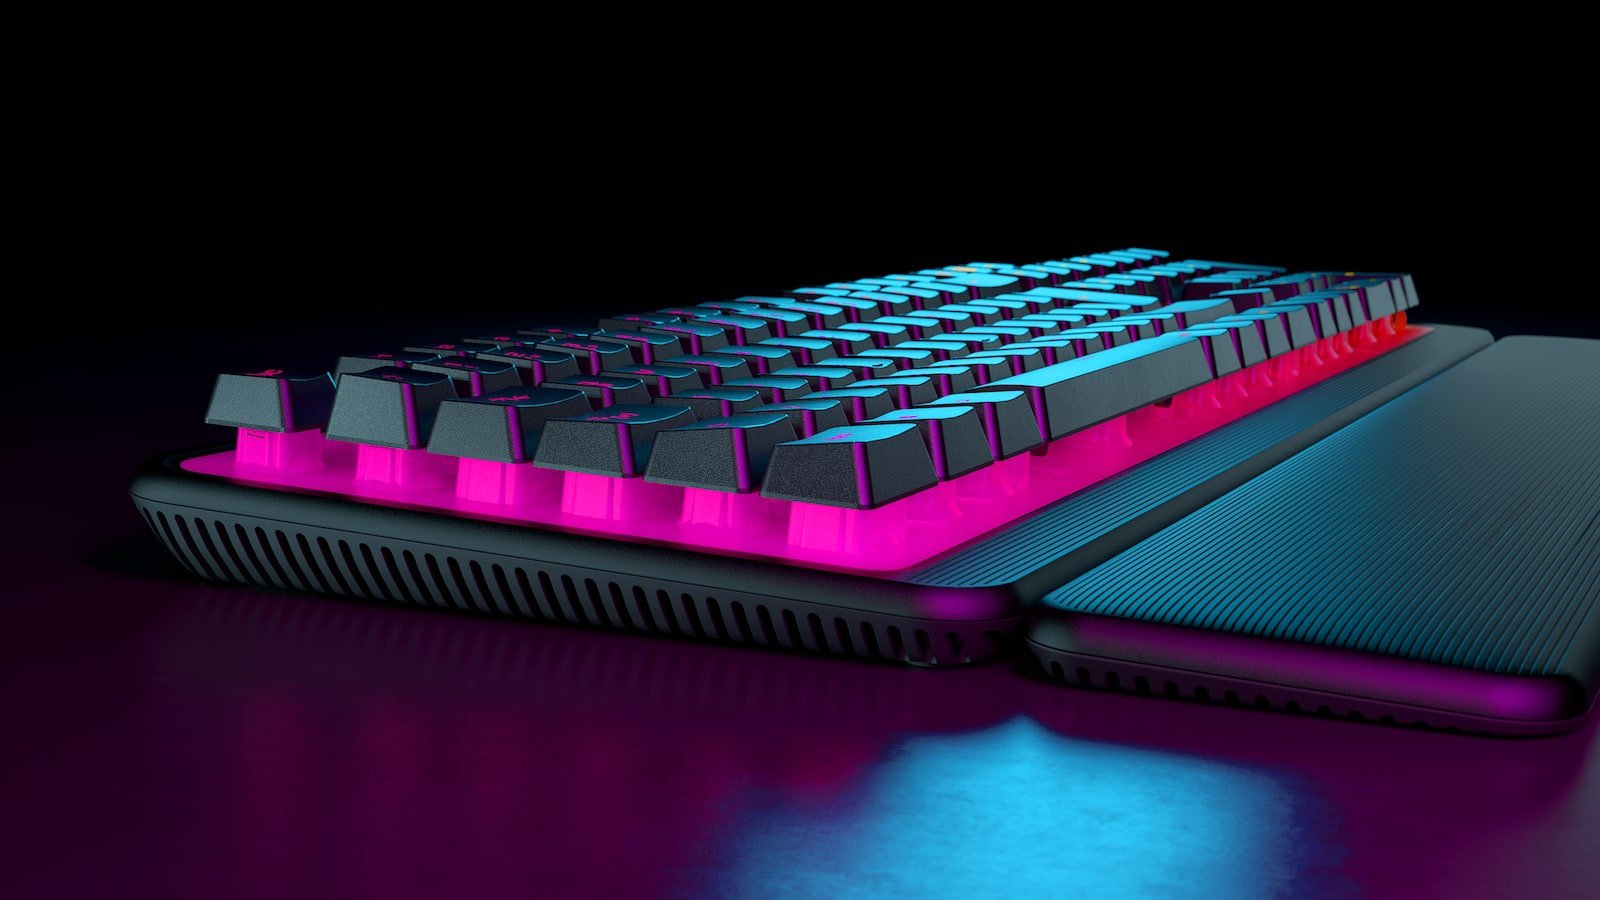 ROCCAT Magma membrane gaming keyboard features silent keys, backlighting, and more